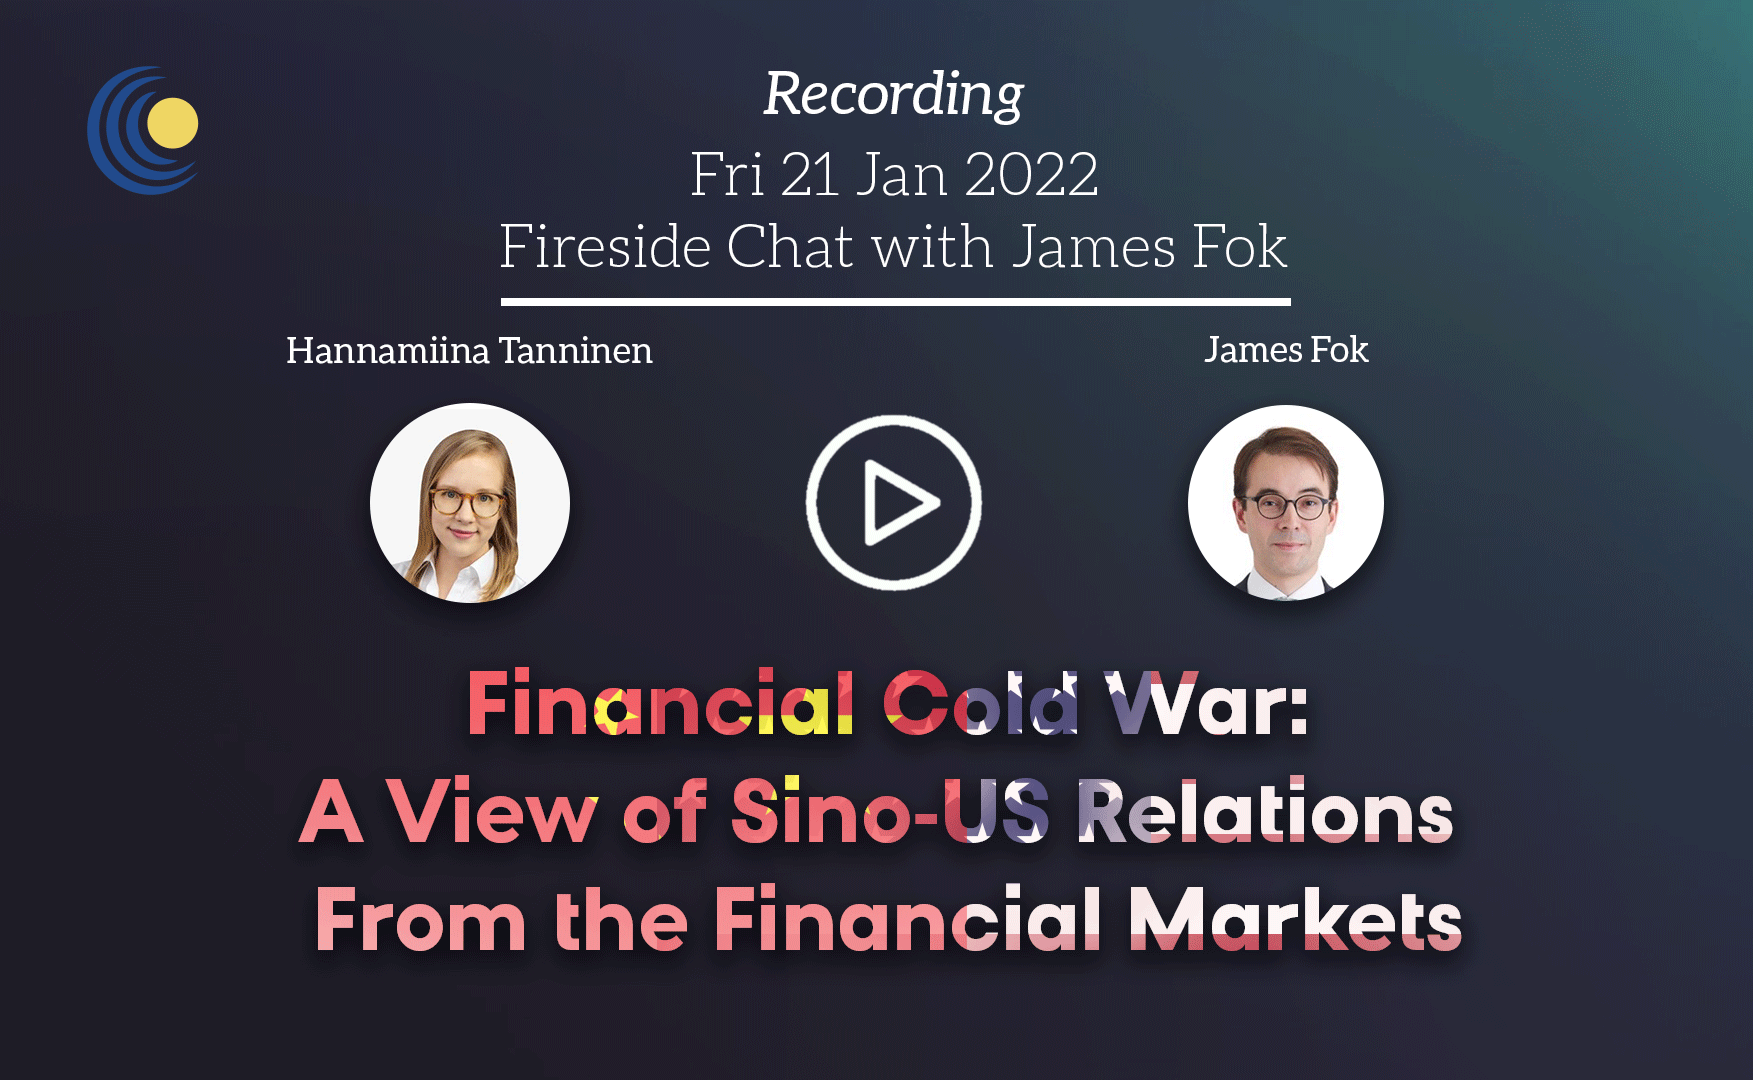 Recording of James Fok Fireside Chat 21 January 2022